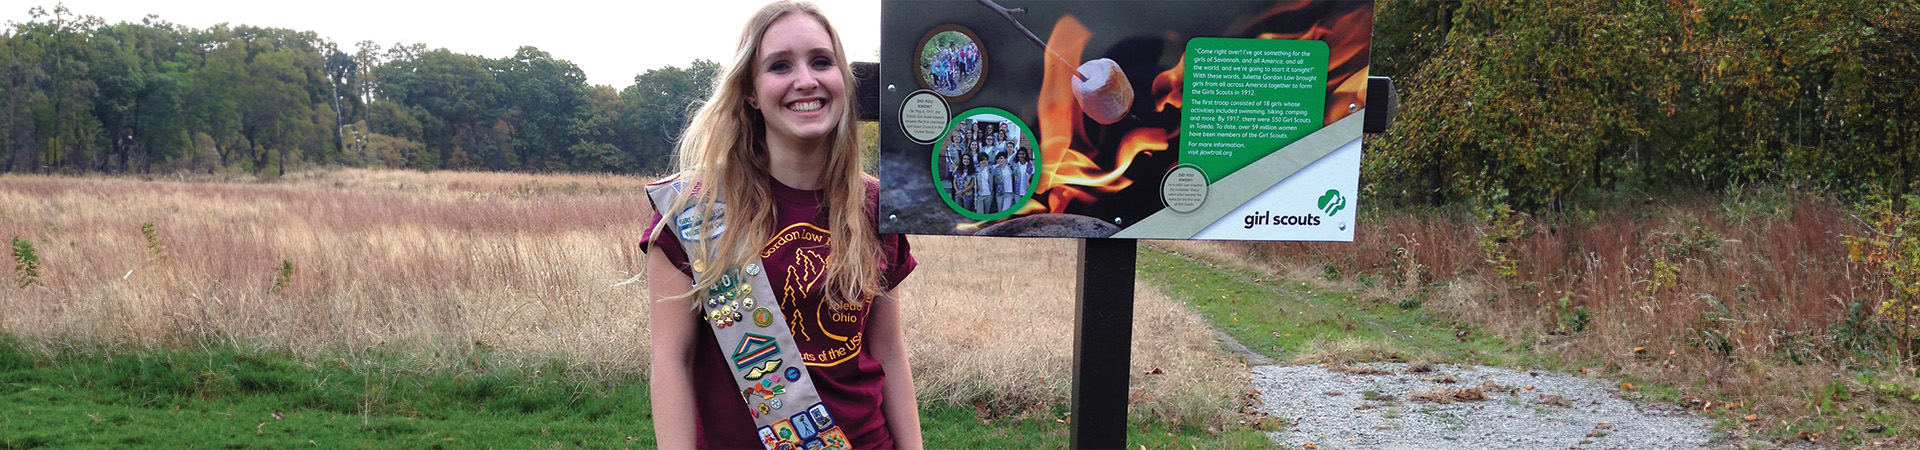  Ellie Leonard smiles big by the sign she made for the first-ever official Girl Scout hiking trail  